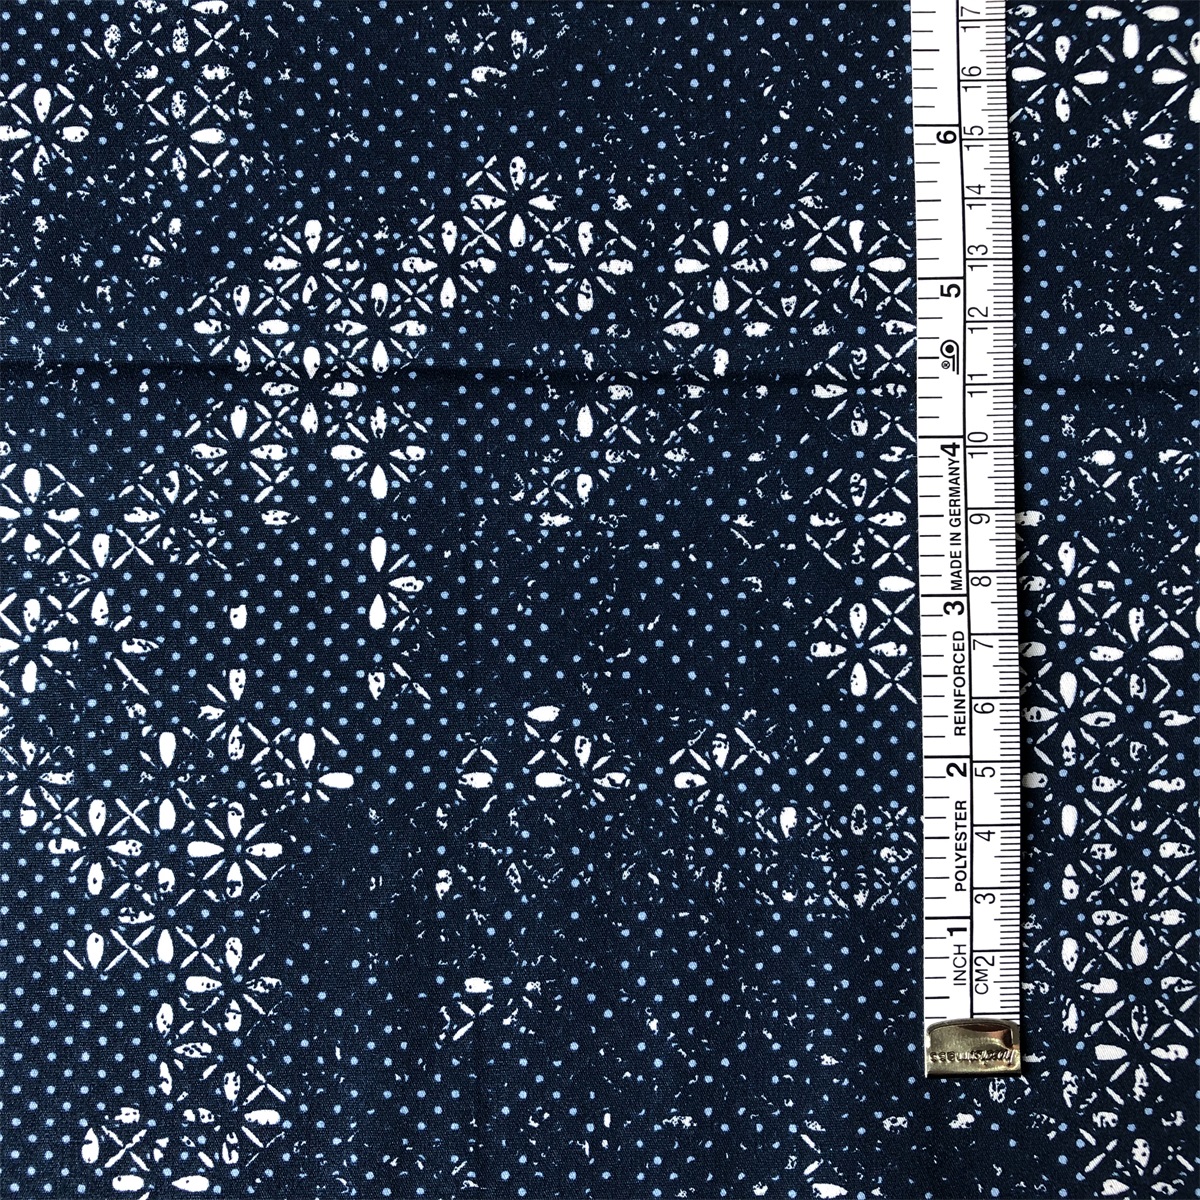 Sun-rising Textile Cotton Printed fabric for men's casual shirts 100% cotton poplin printed shirts woven fabric soft touch